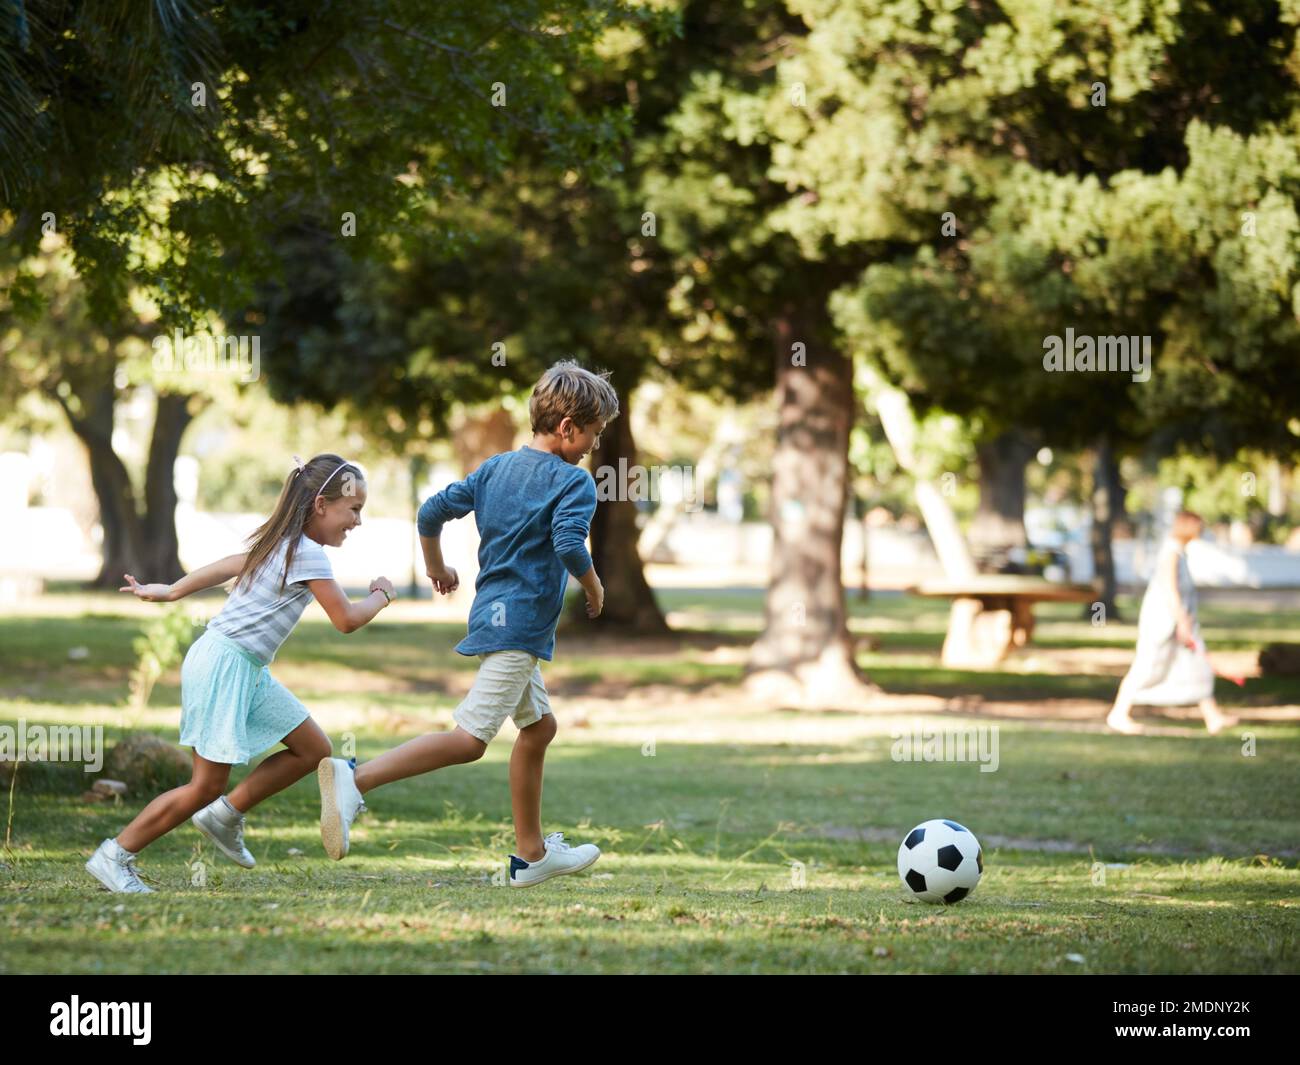 Whos going to be the next football star. an adorable little boy and girl playing soccer in the park. Stock Photo